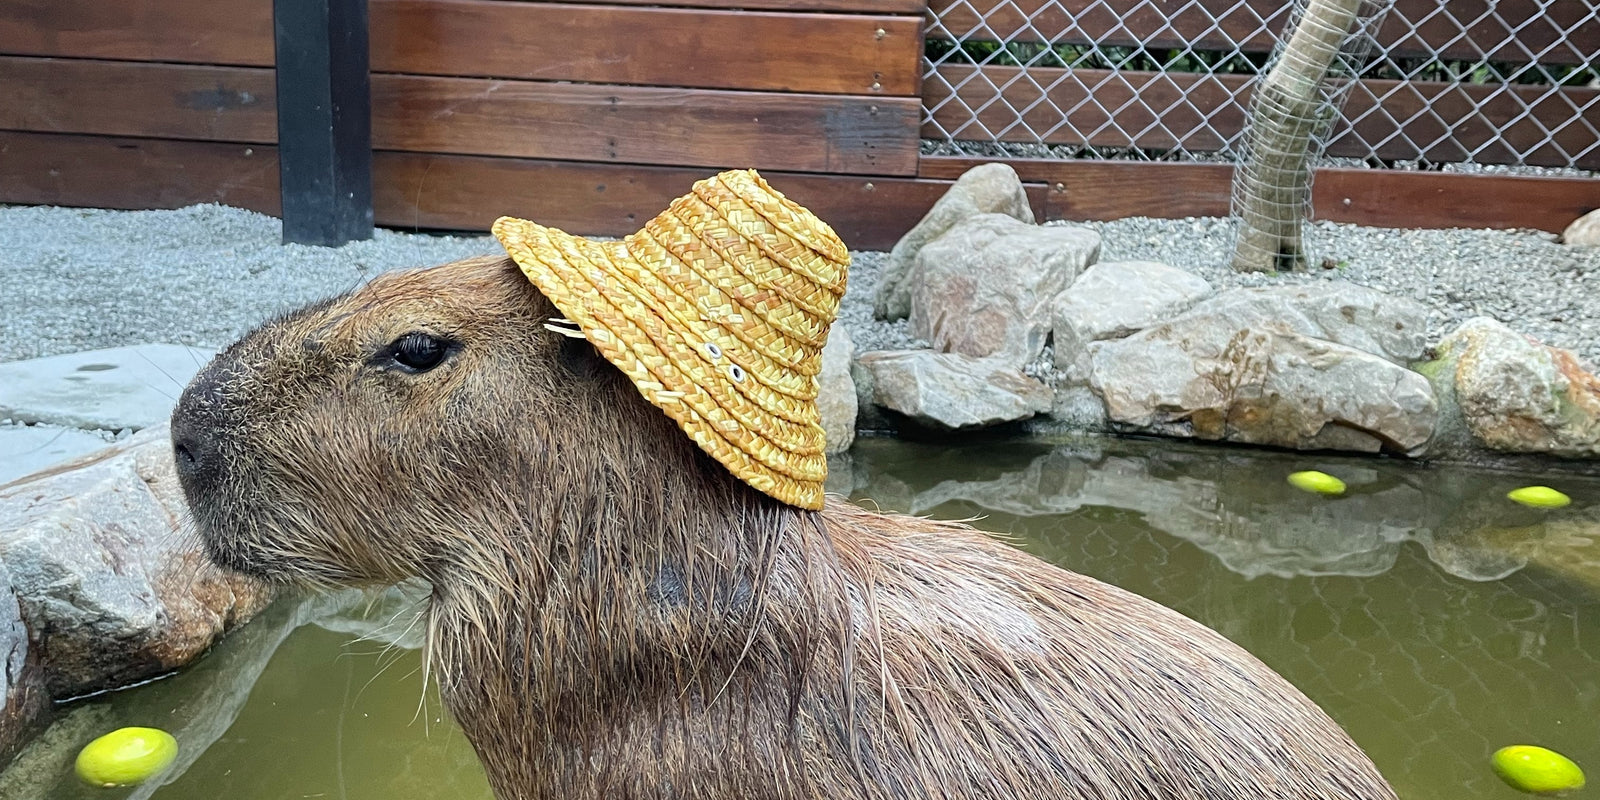 Capybara 101: An Introduction to the World's Largest Rodent